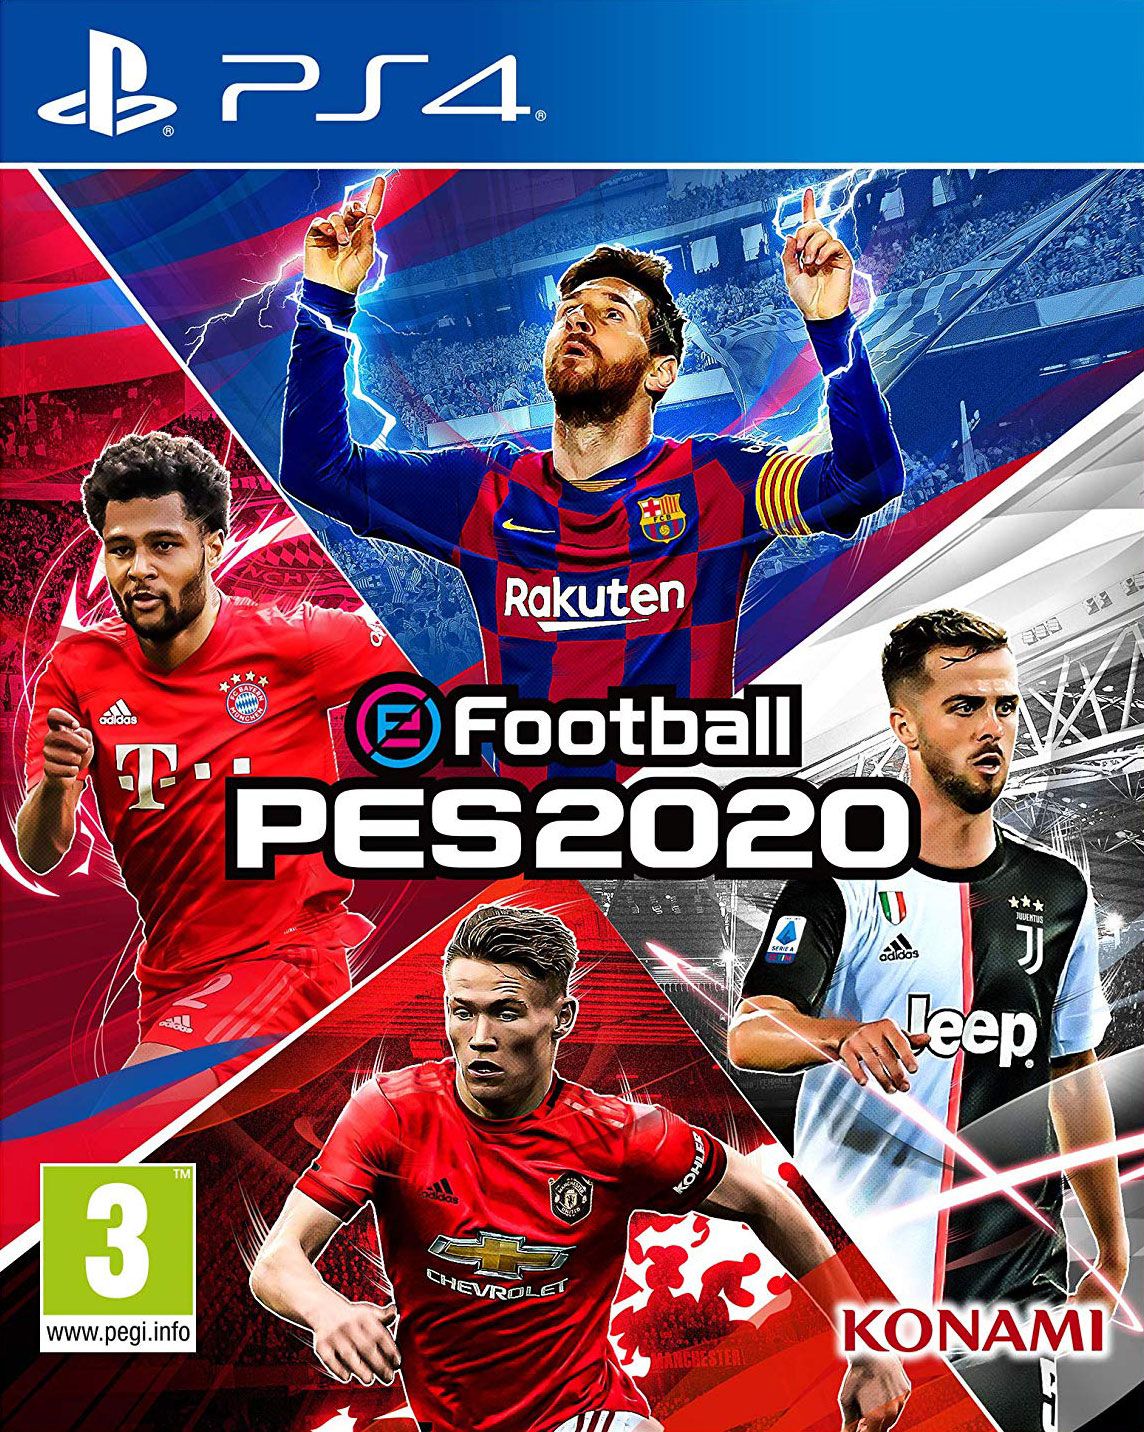 Pro Evolution Soccer 2020 (PS4)(New) Buy from Pwned Games with